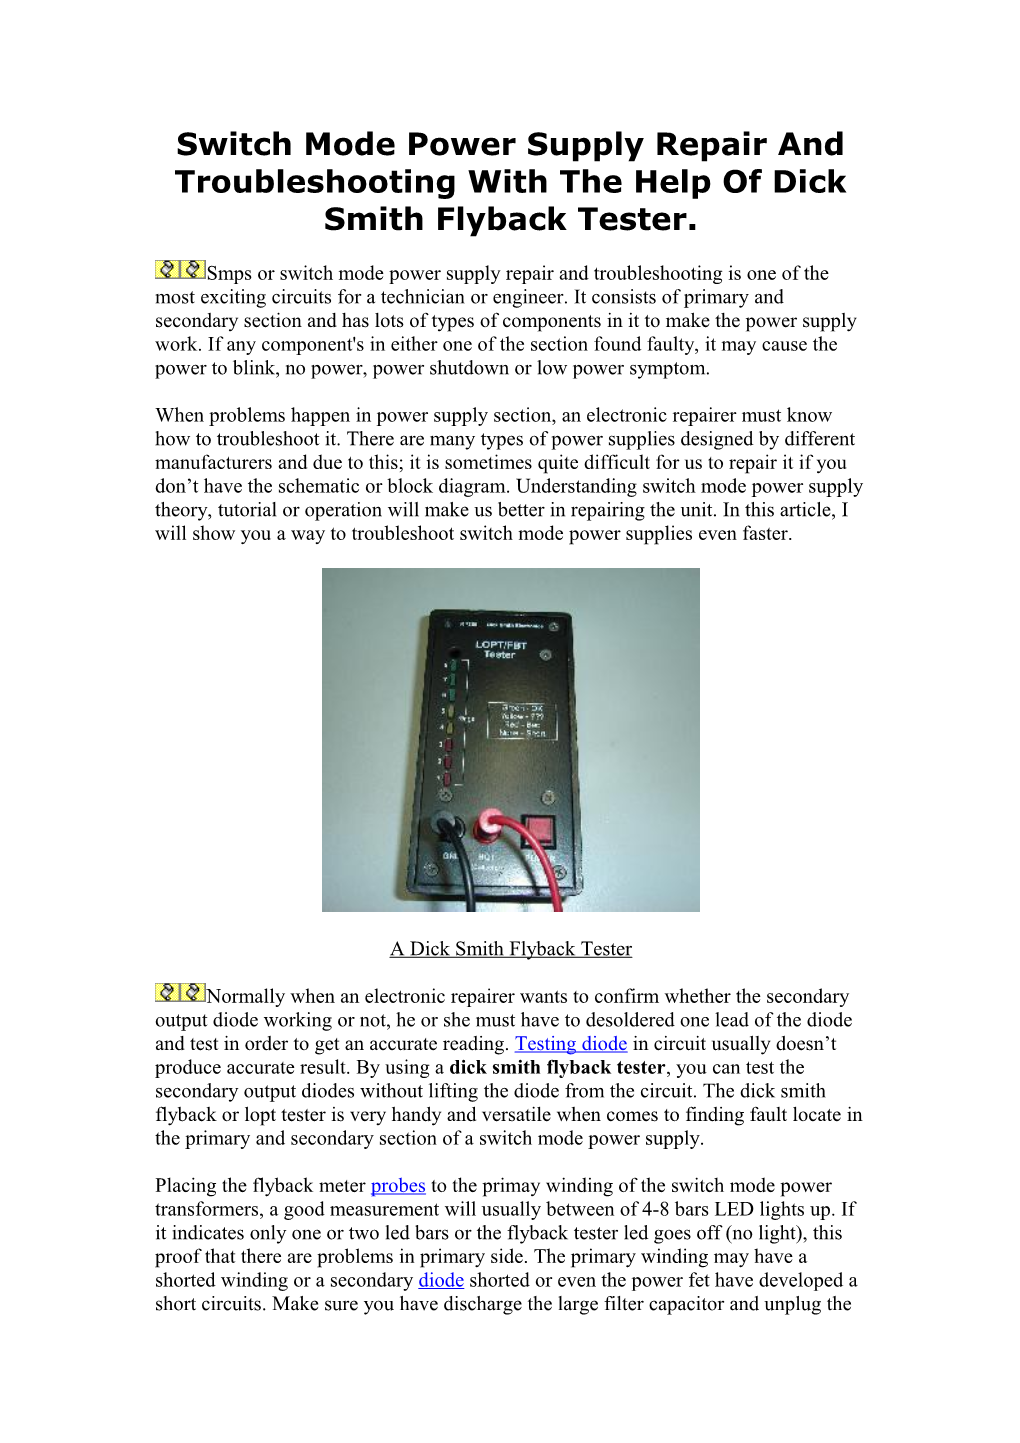 Switch Mode Power Supply Repair and Troubleshooting with the Help of Dick Smith Flyback Tester